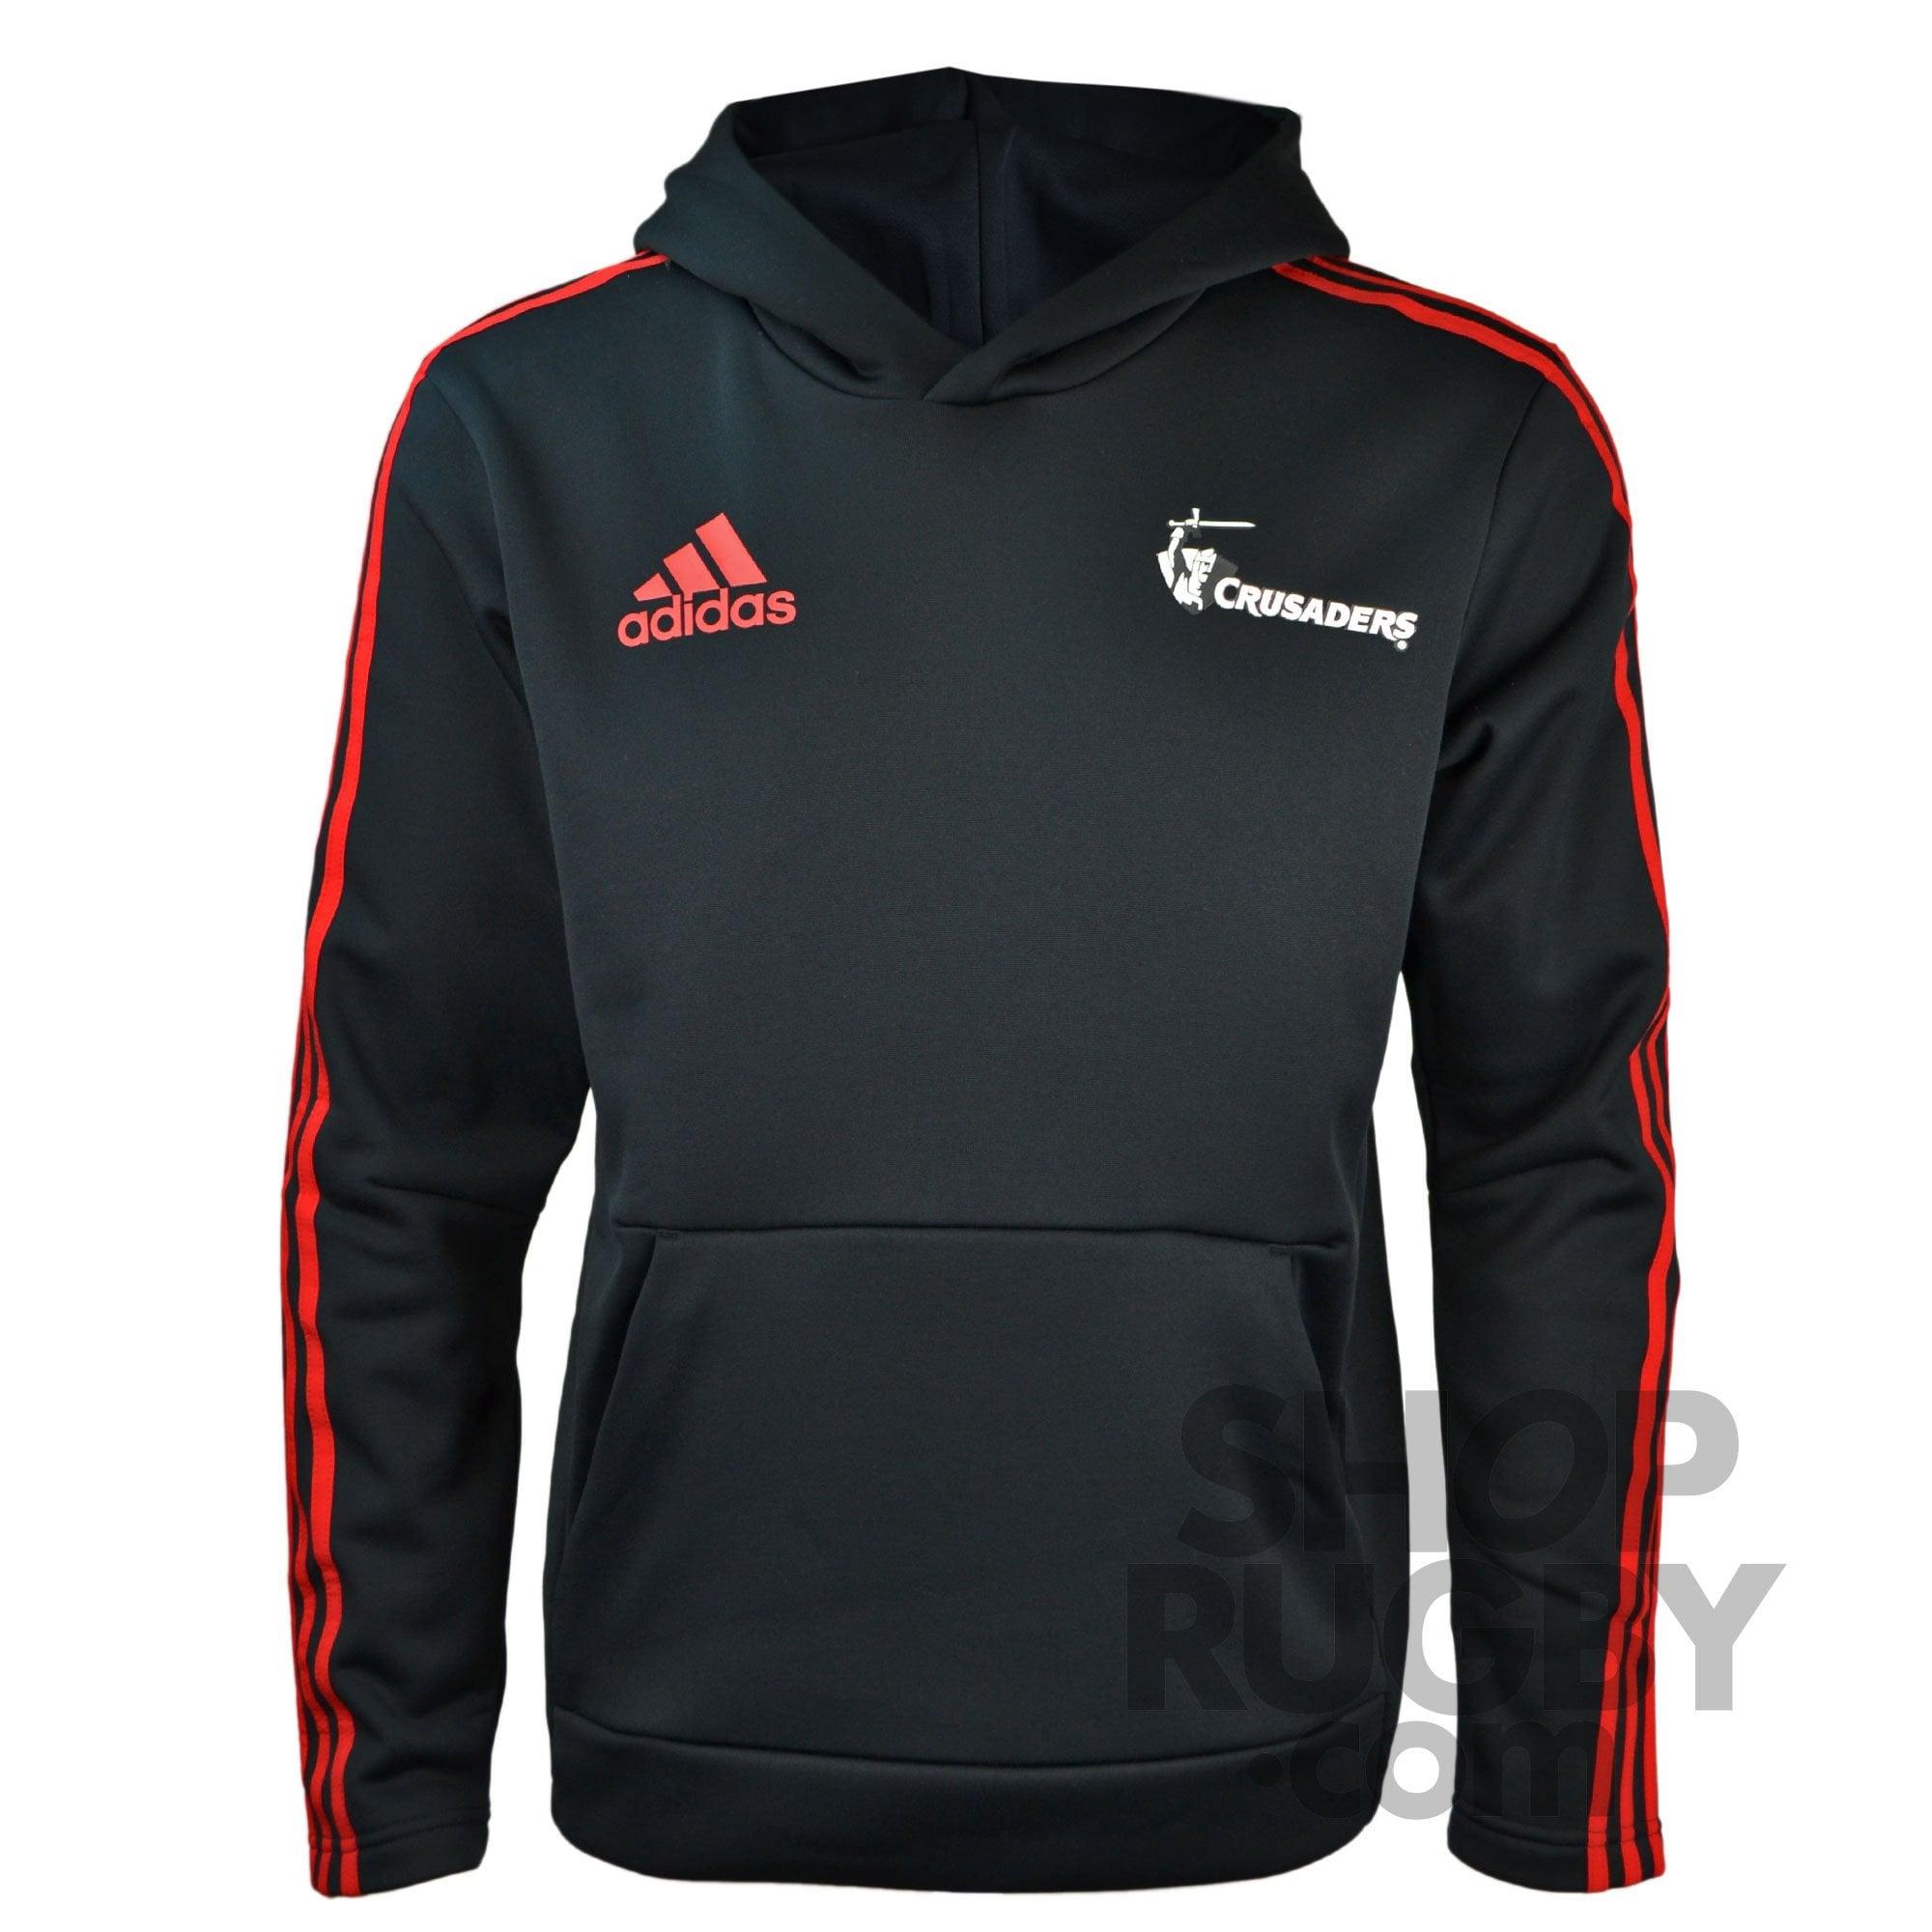 Black and Red Crusaders Logo - Crusaders Supporters Hoody 2019 - Black and Red